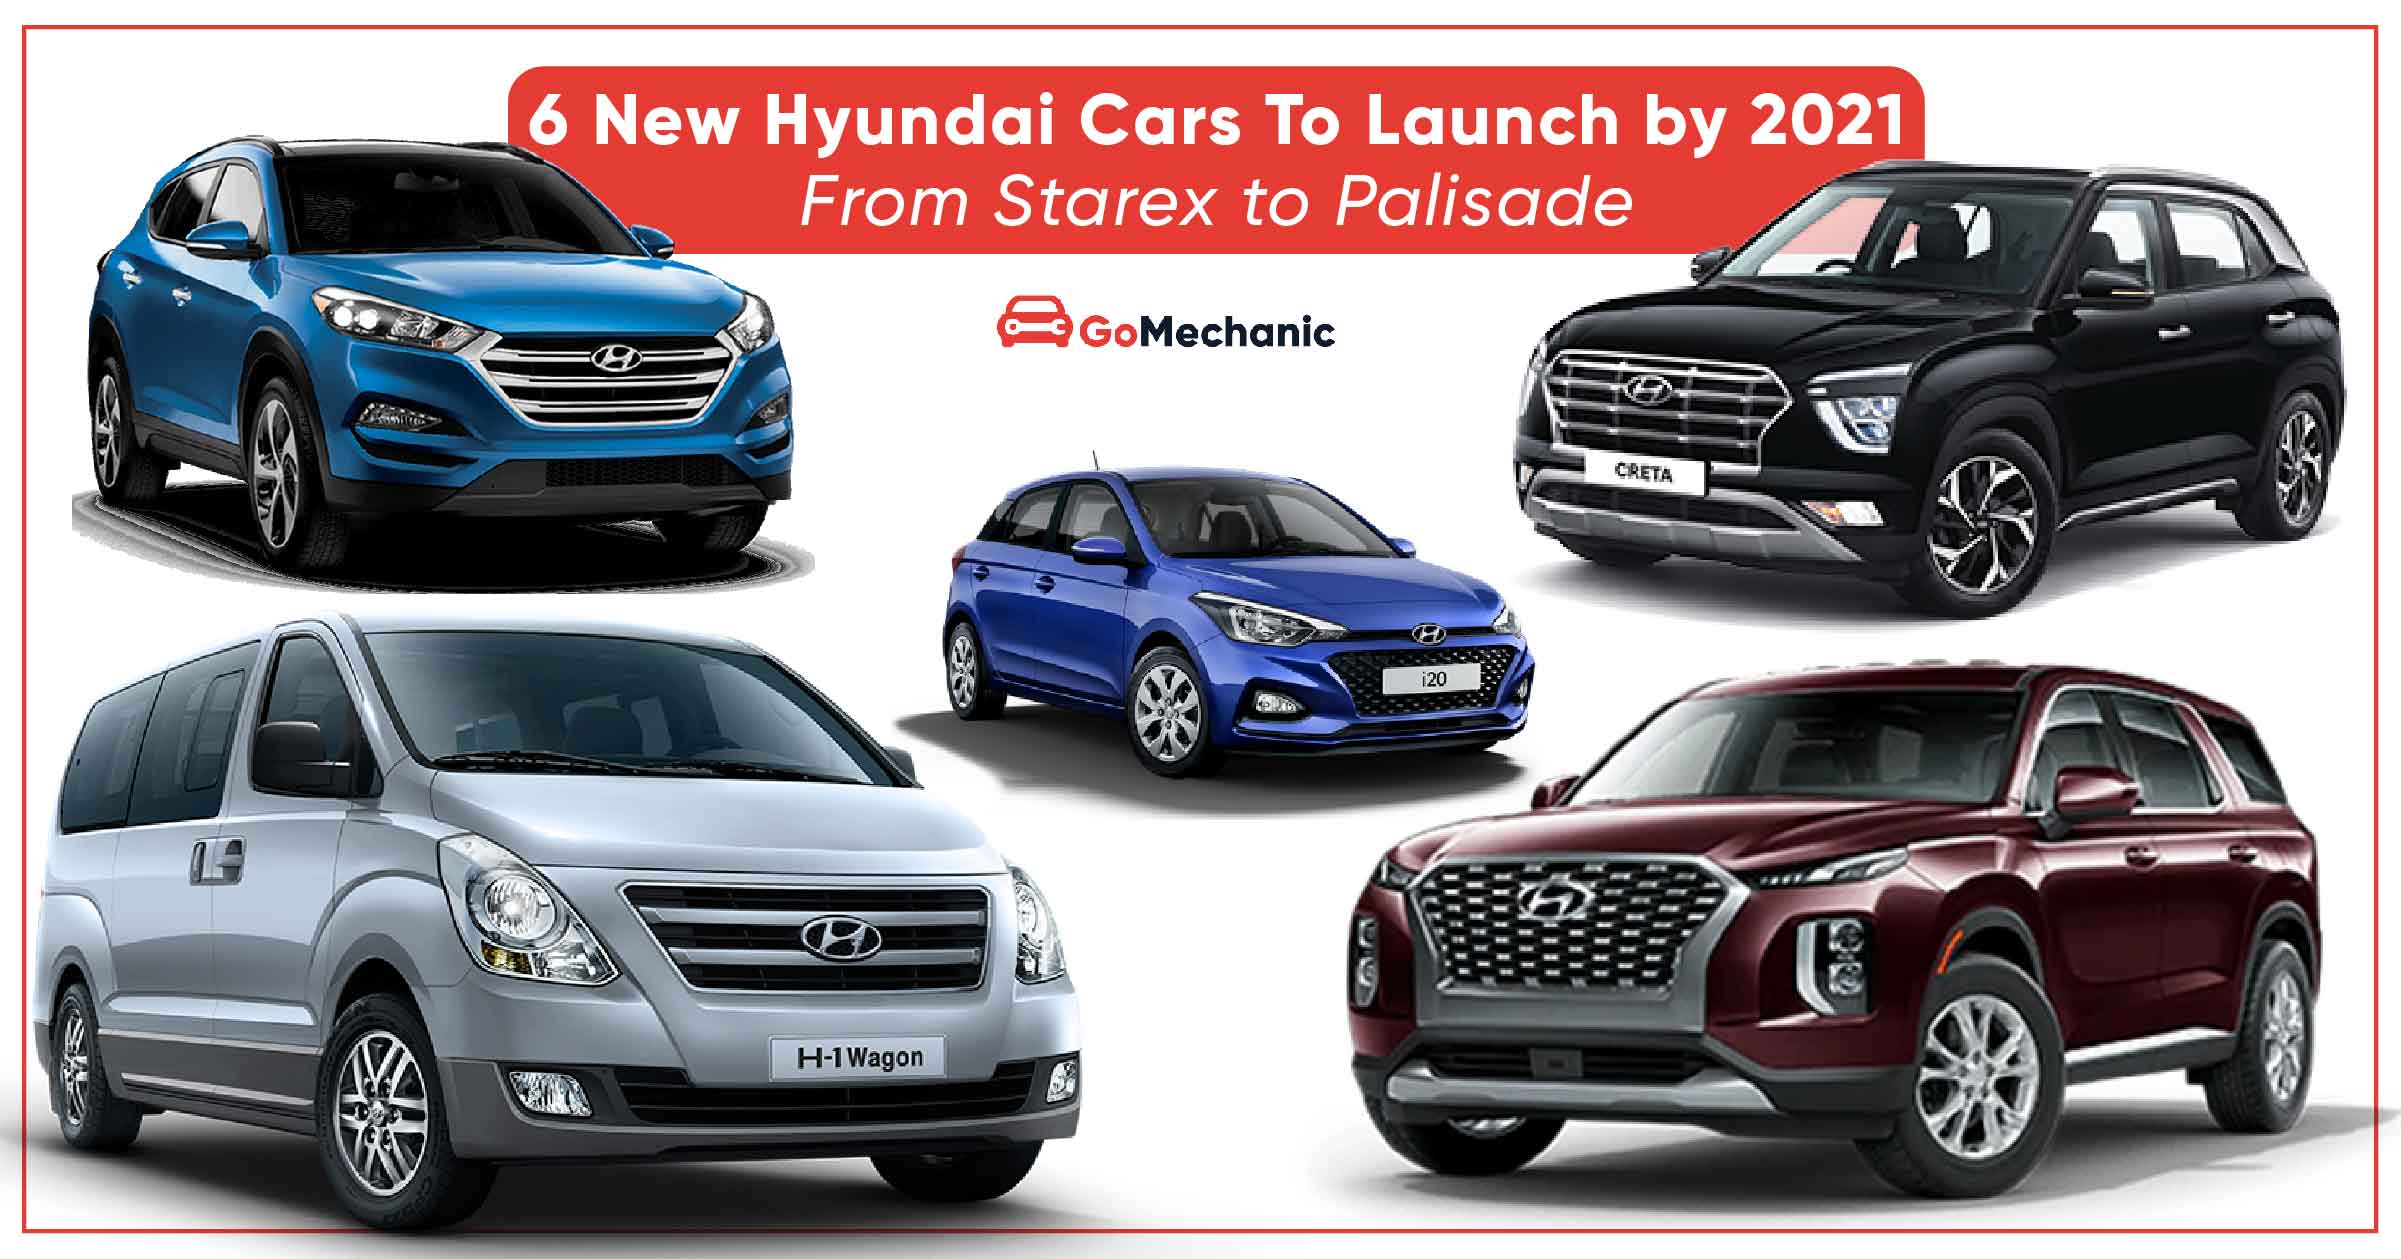 New Hyundai Cars To Launch by 2021 | From Starex to Palisade